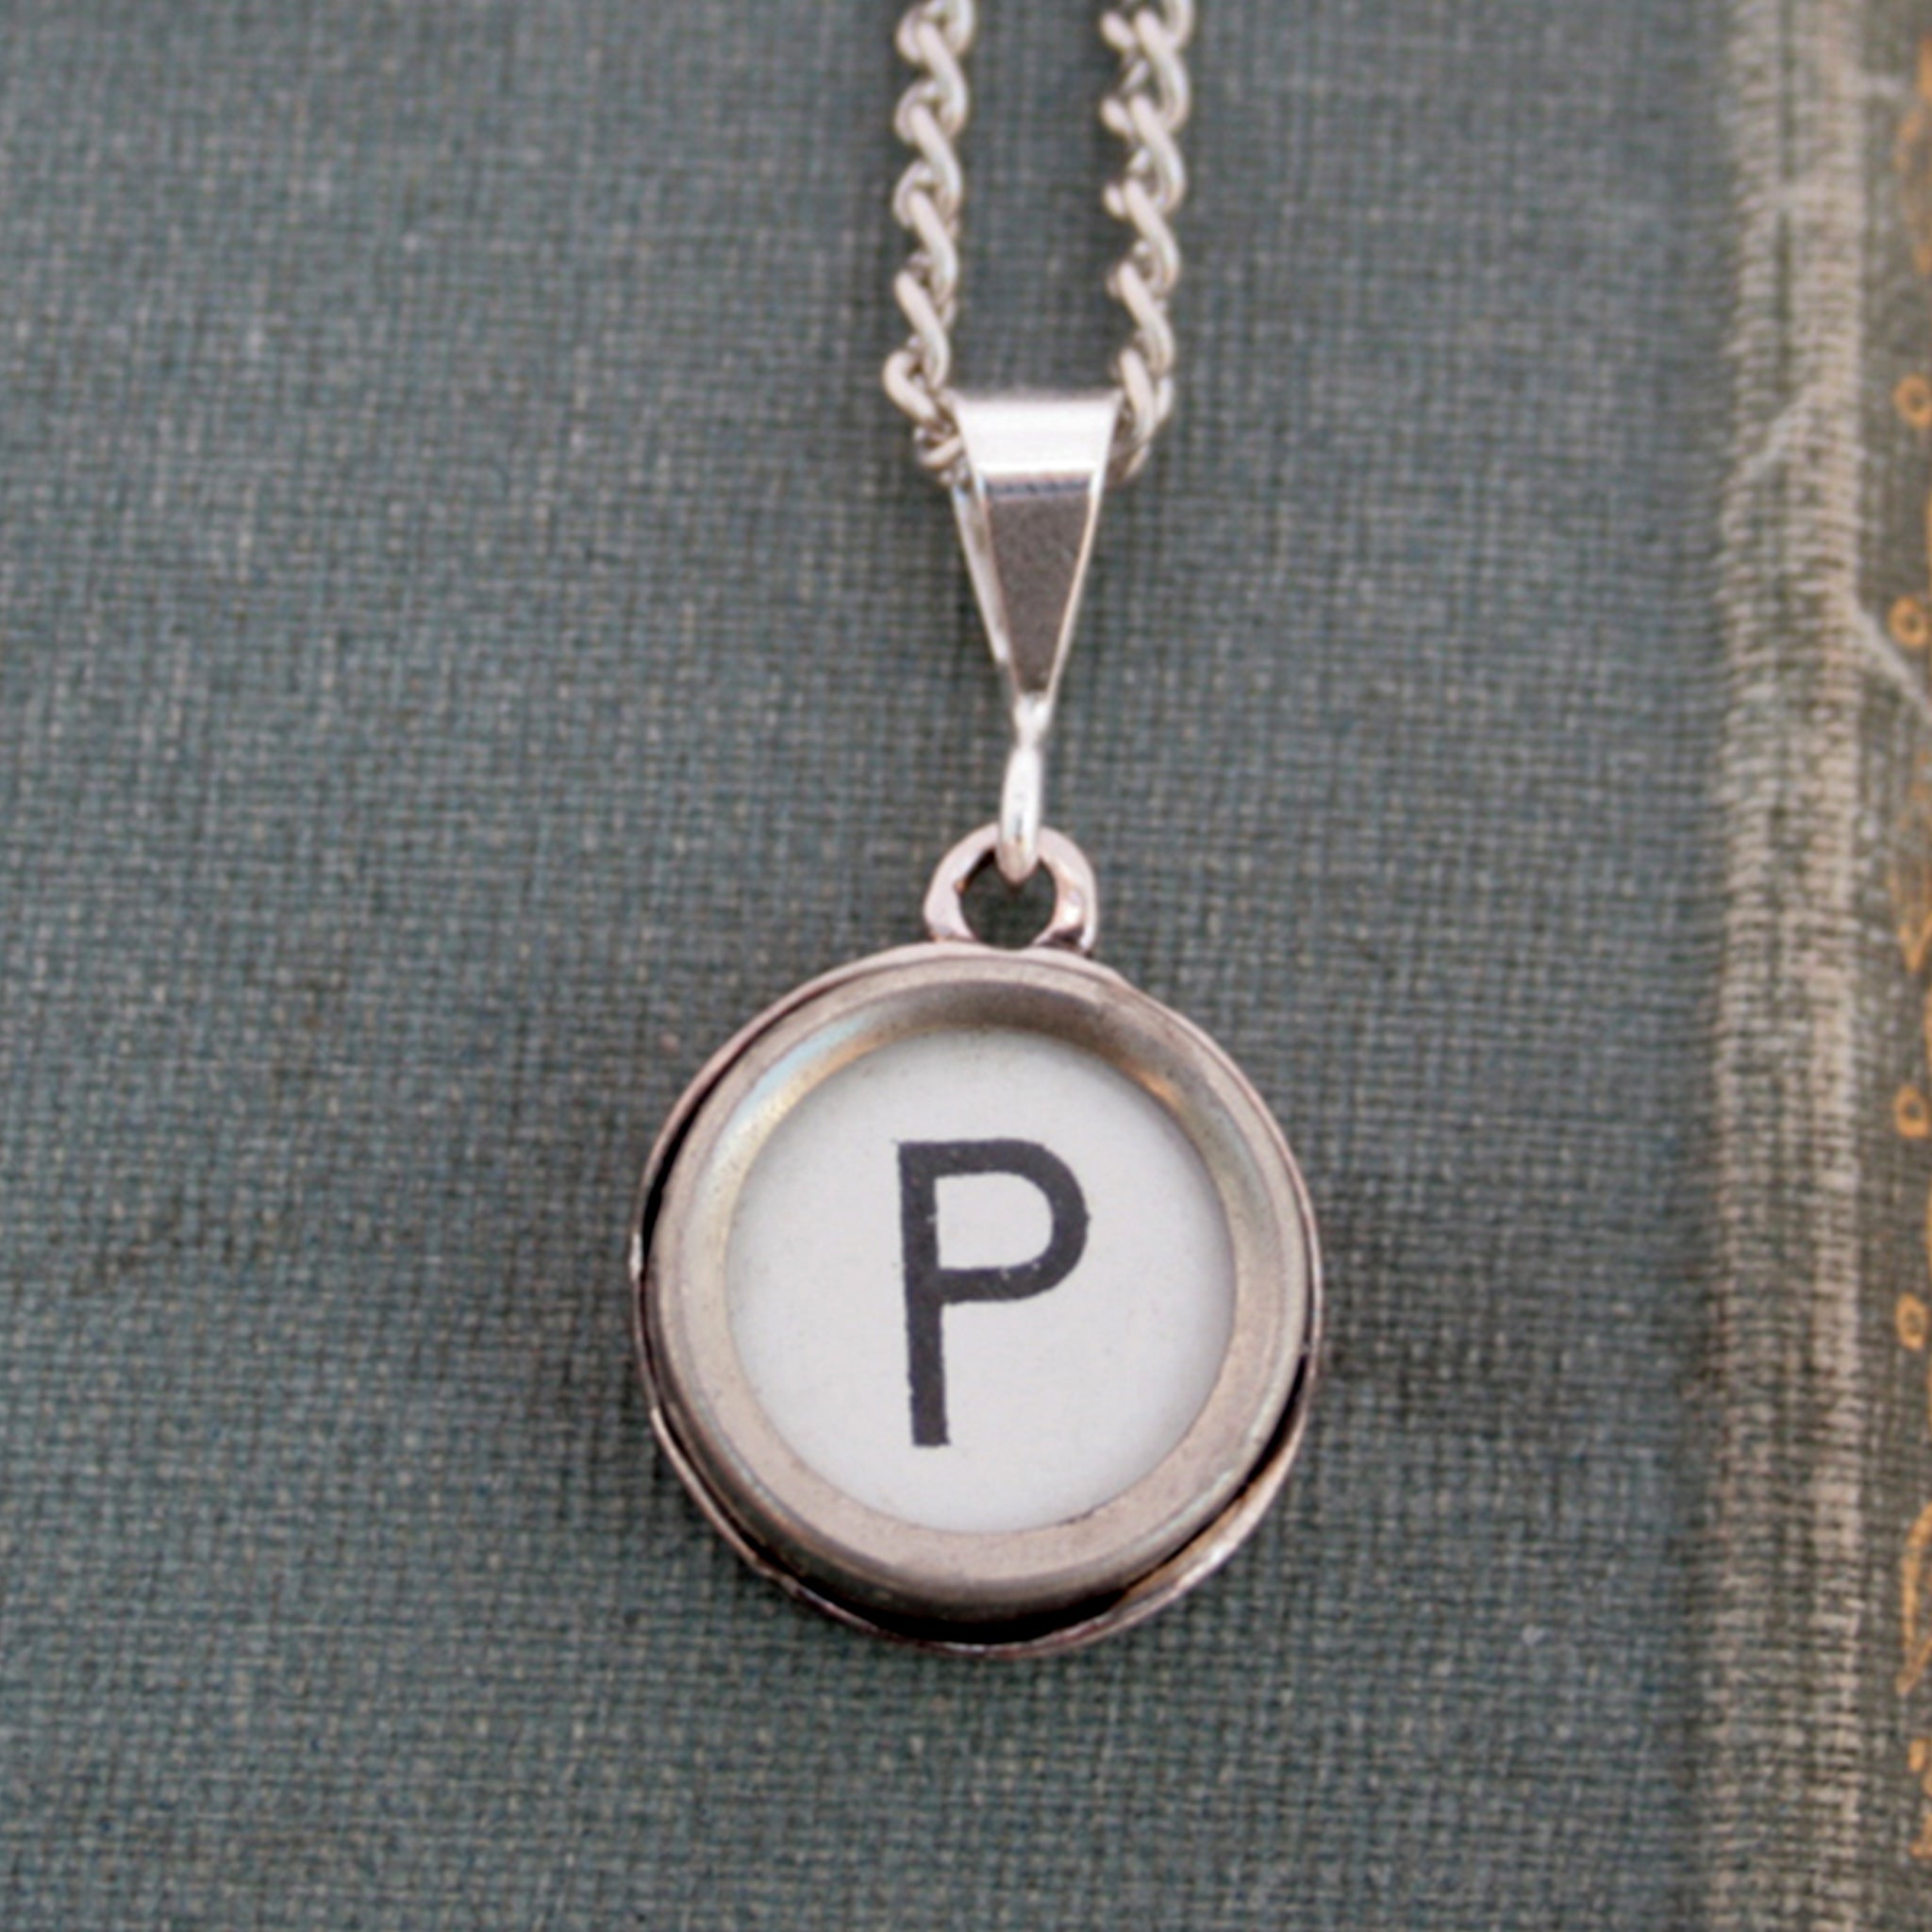 White P letter initial necklace made of antique typewriter key